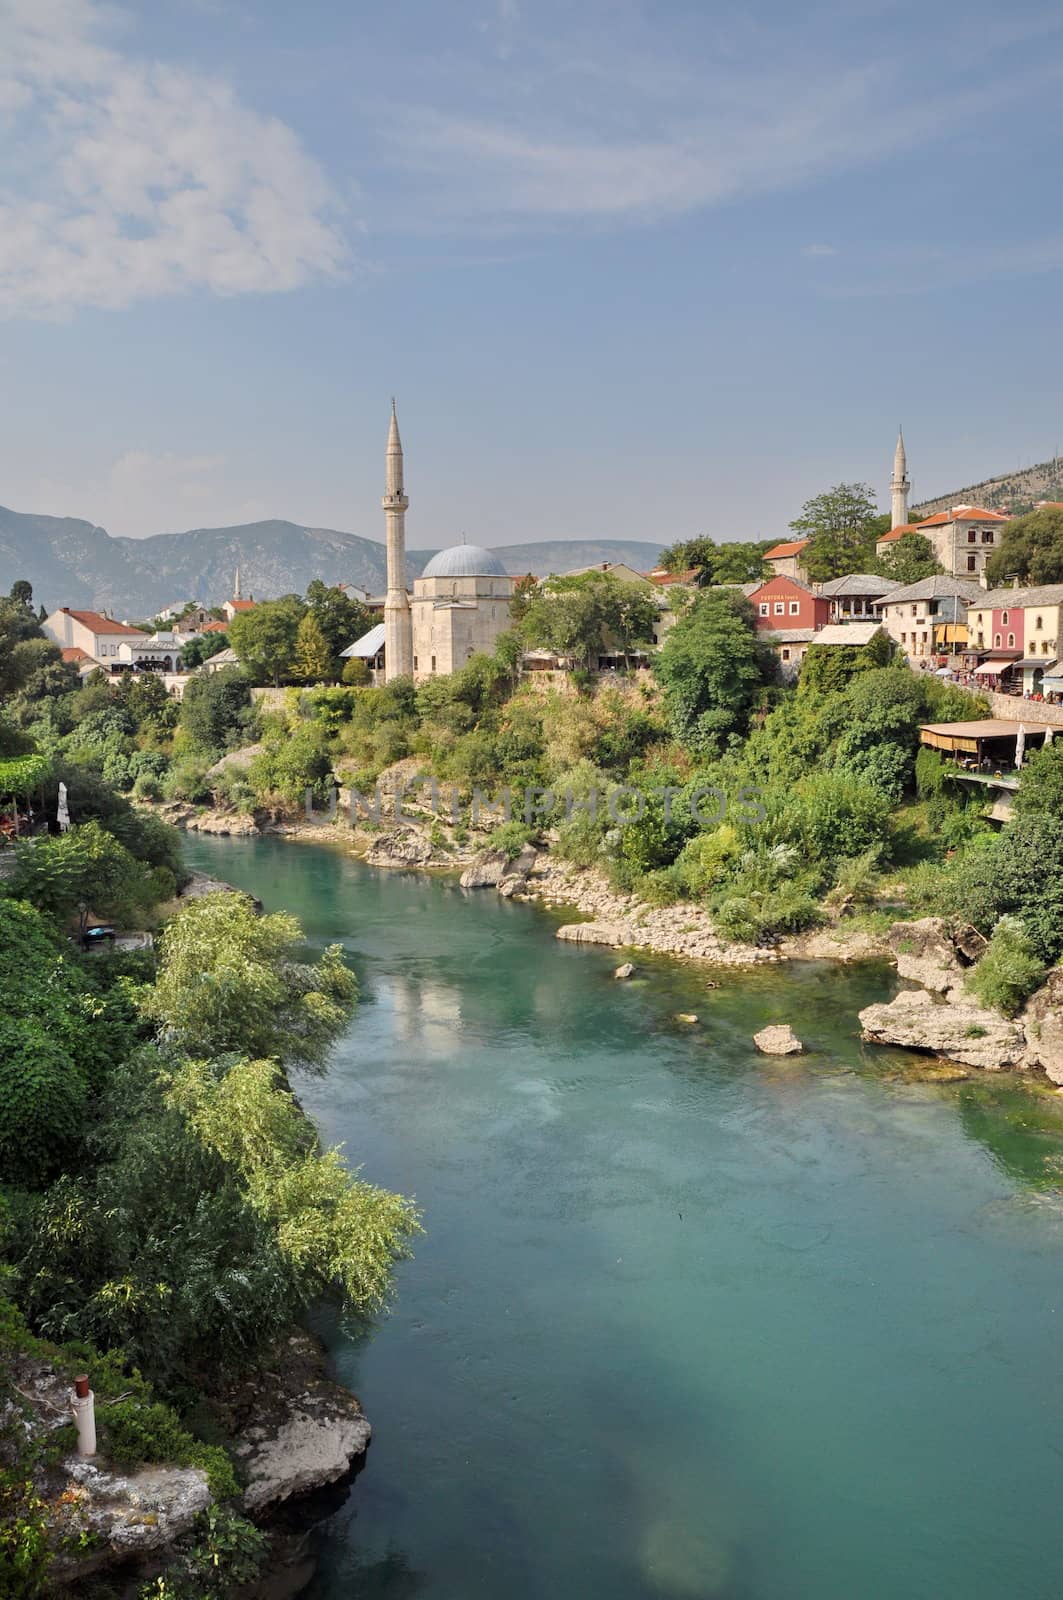 View of Mostar in Bosnia Hercegovina by anderm